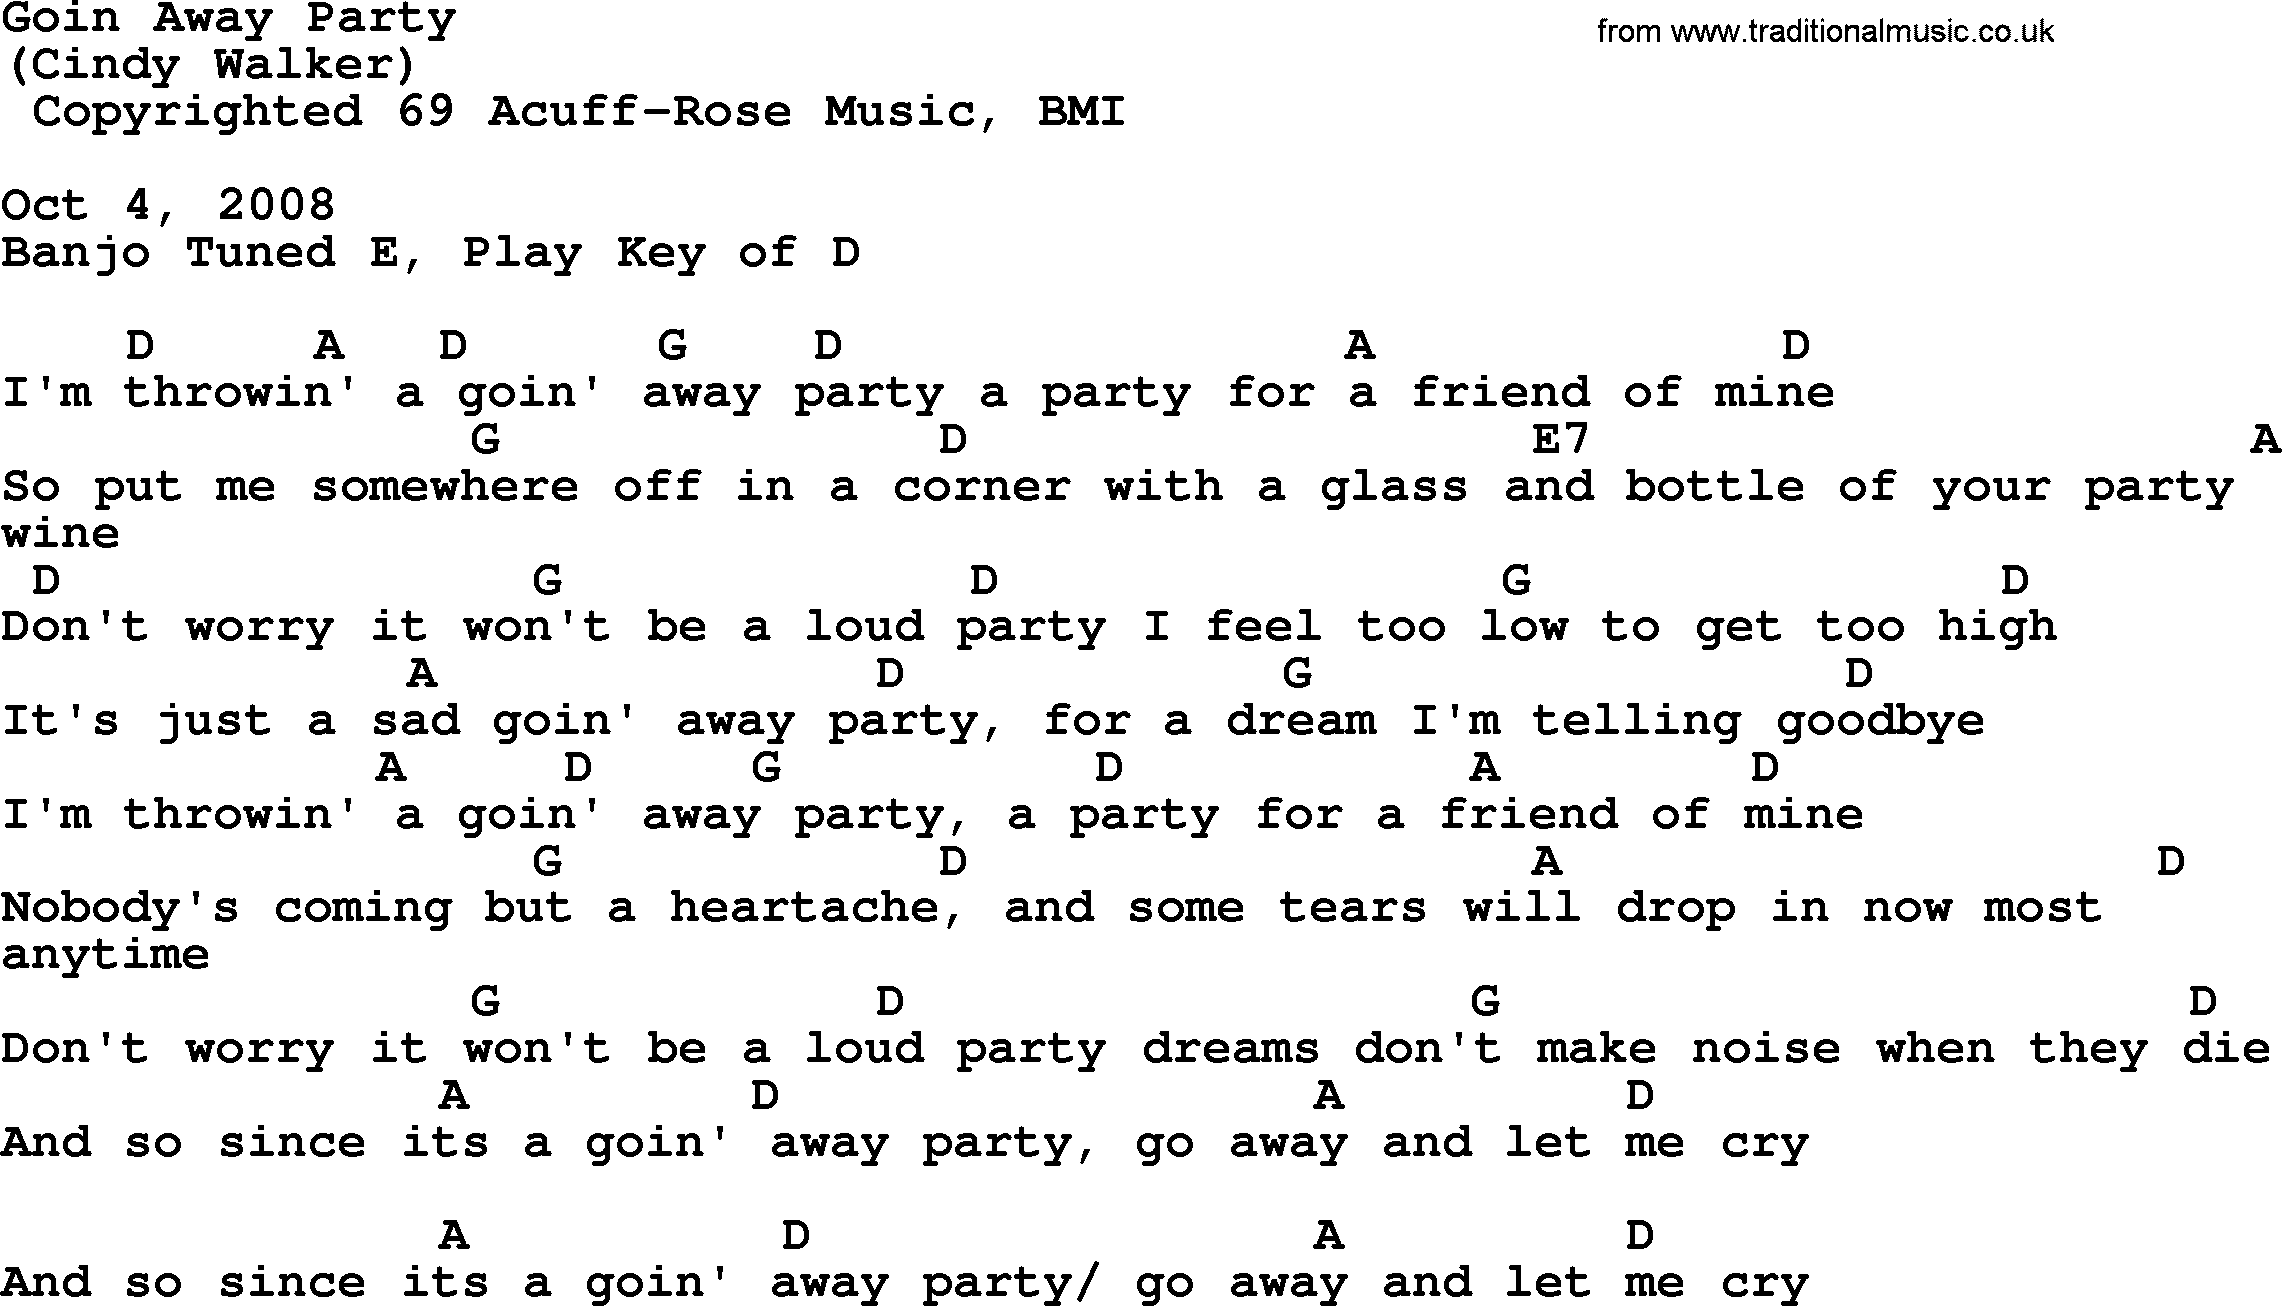 Merle Haggard song: Goin Away Party, lyrics and chords